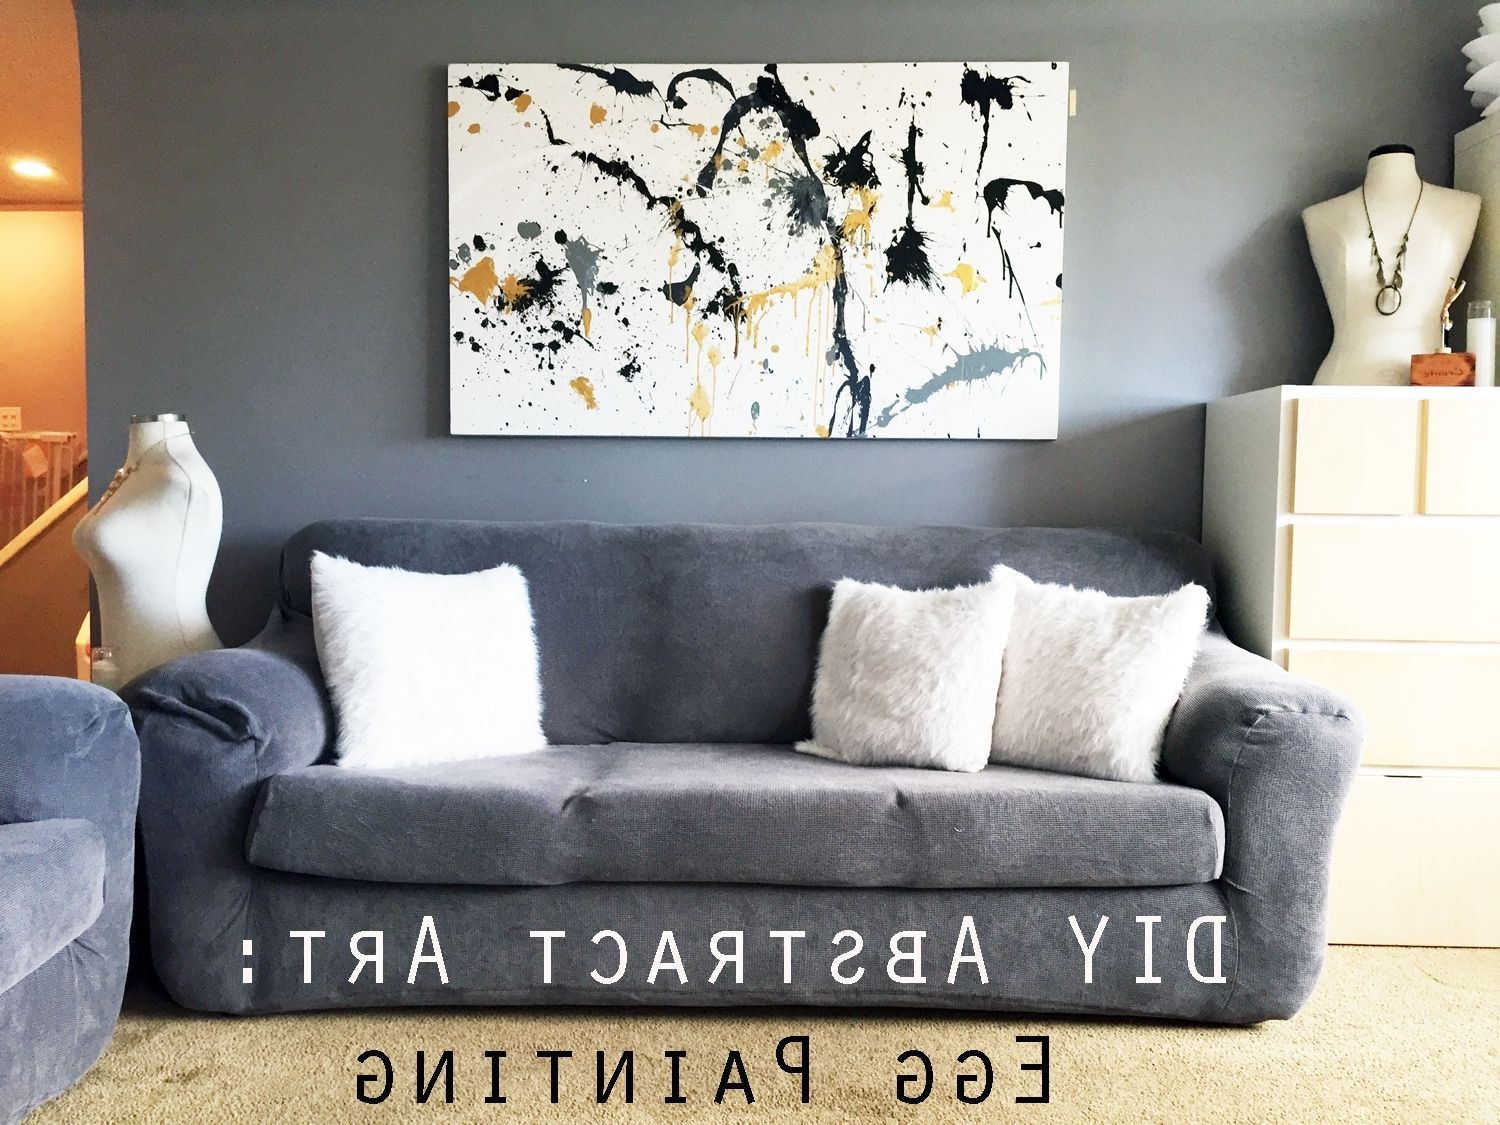 Diy Canvas Painting: Egg Splatter Gold Abstract Art – Creative Inside Recent Diy Abstract Wall Art (View 14 of 15)